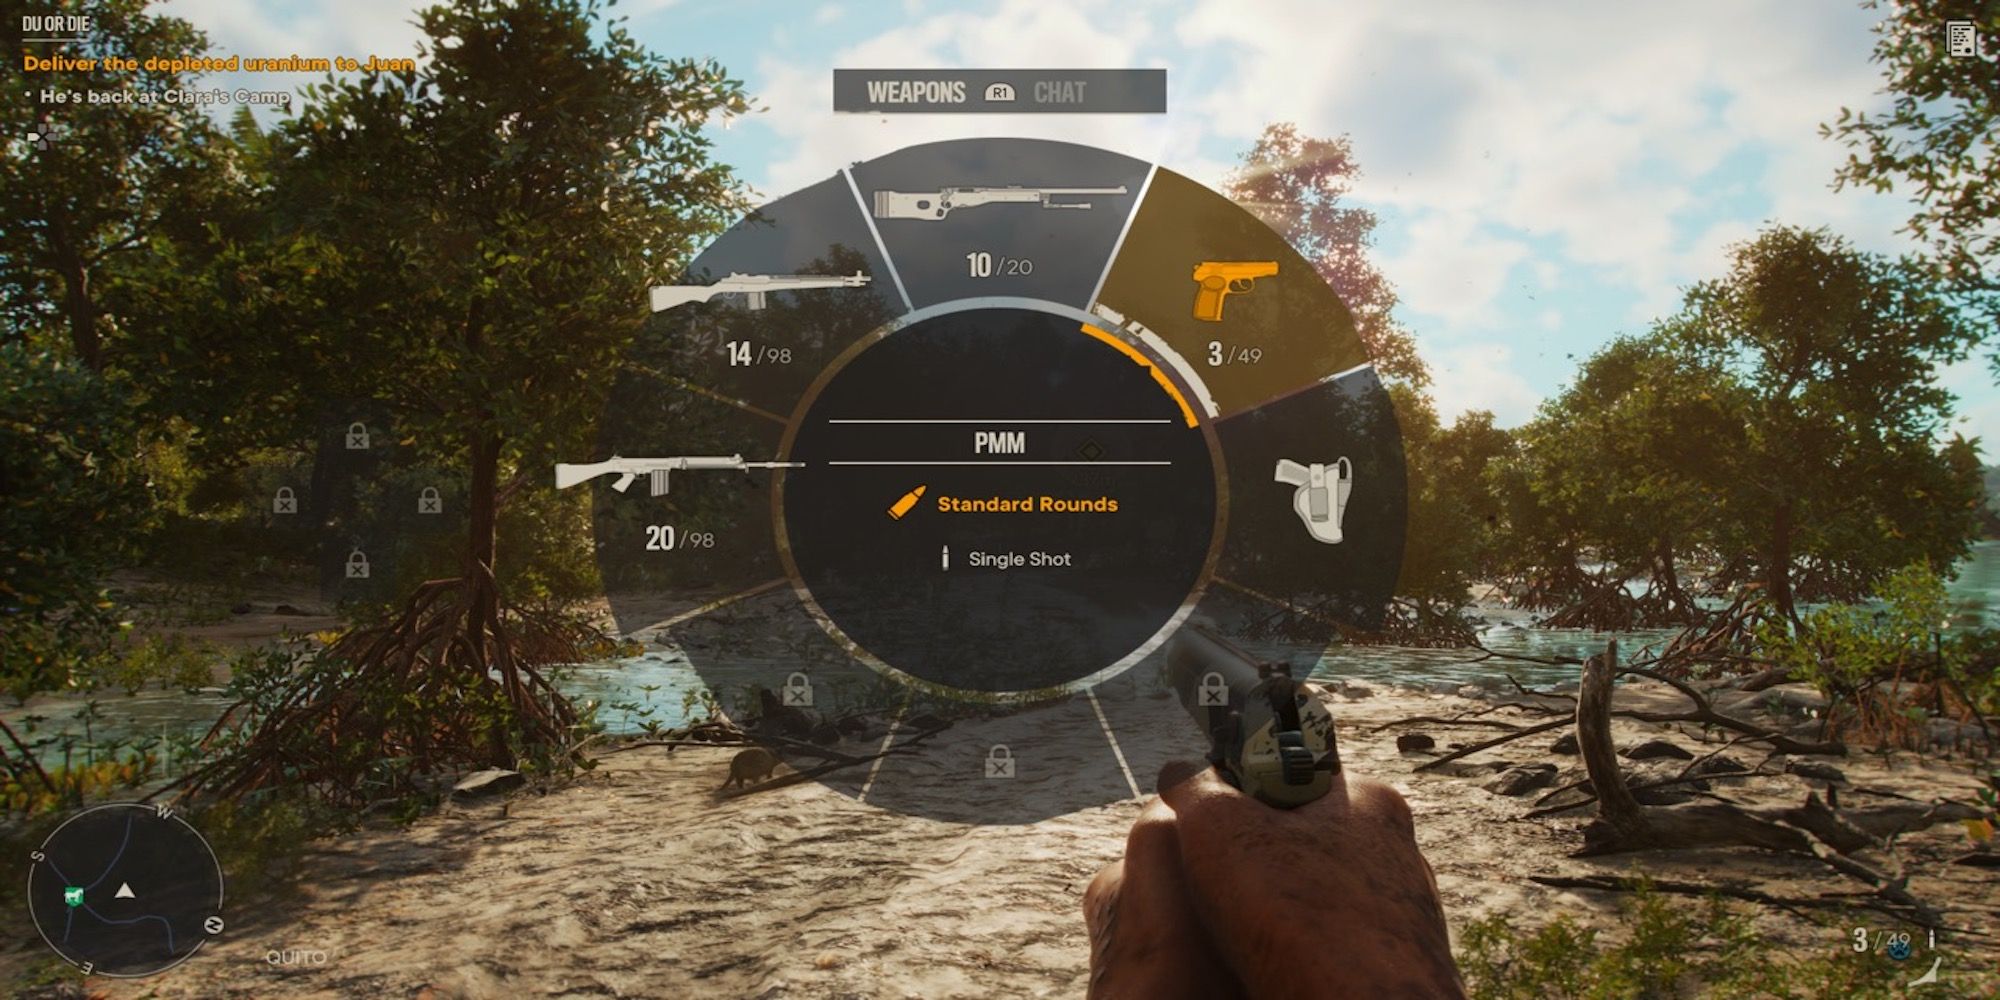 The weapon wheel from Far Cry 6